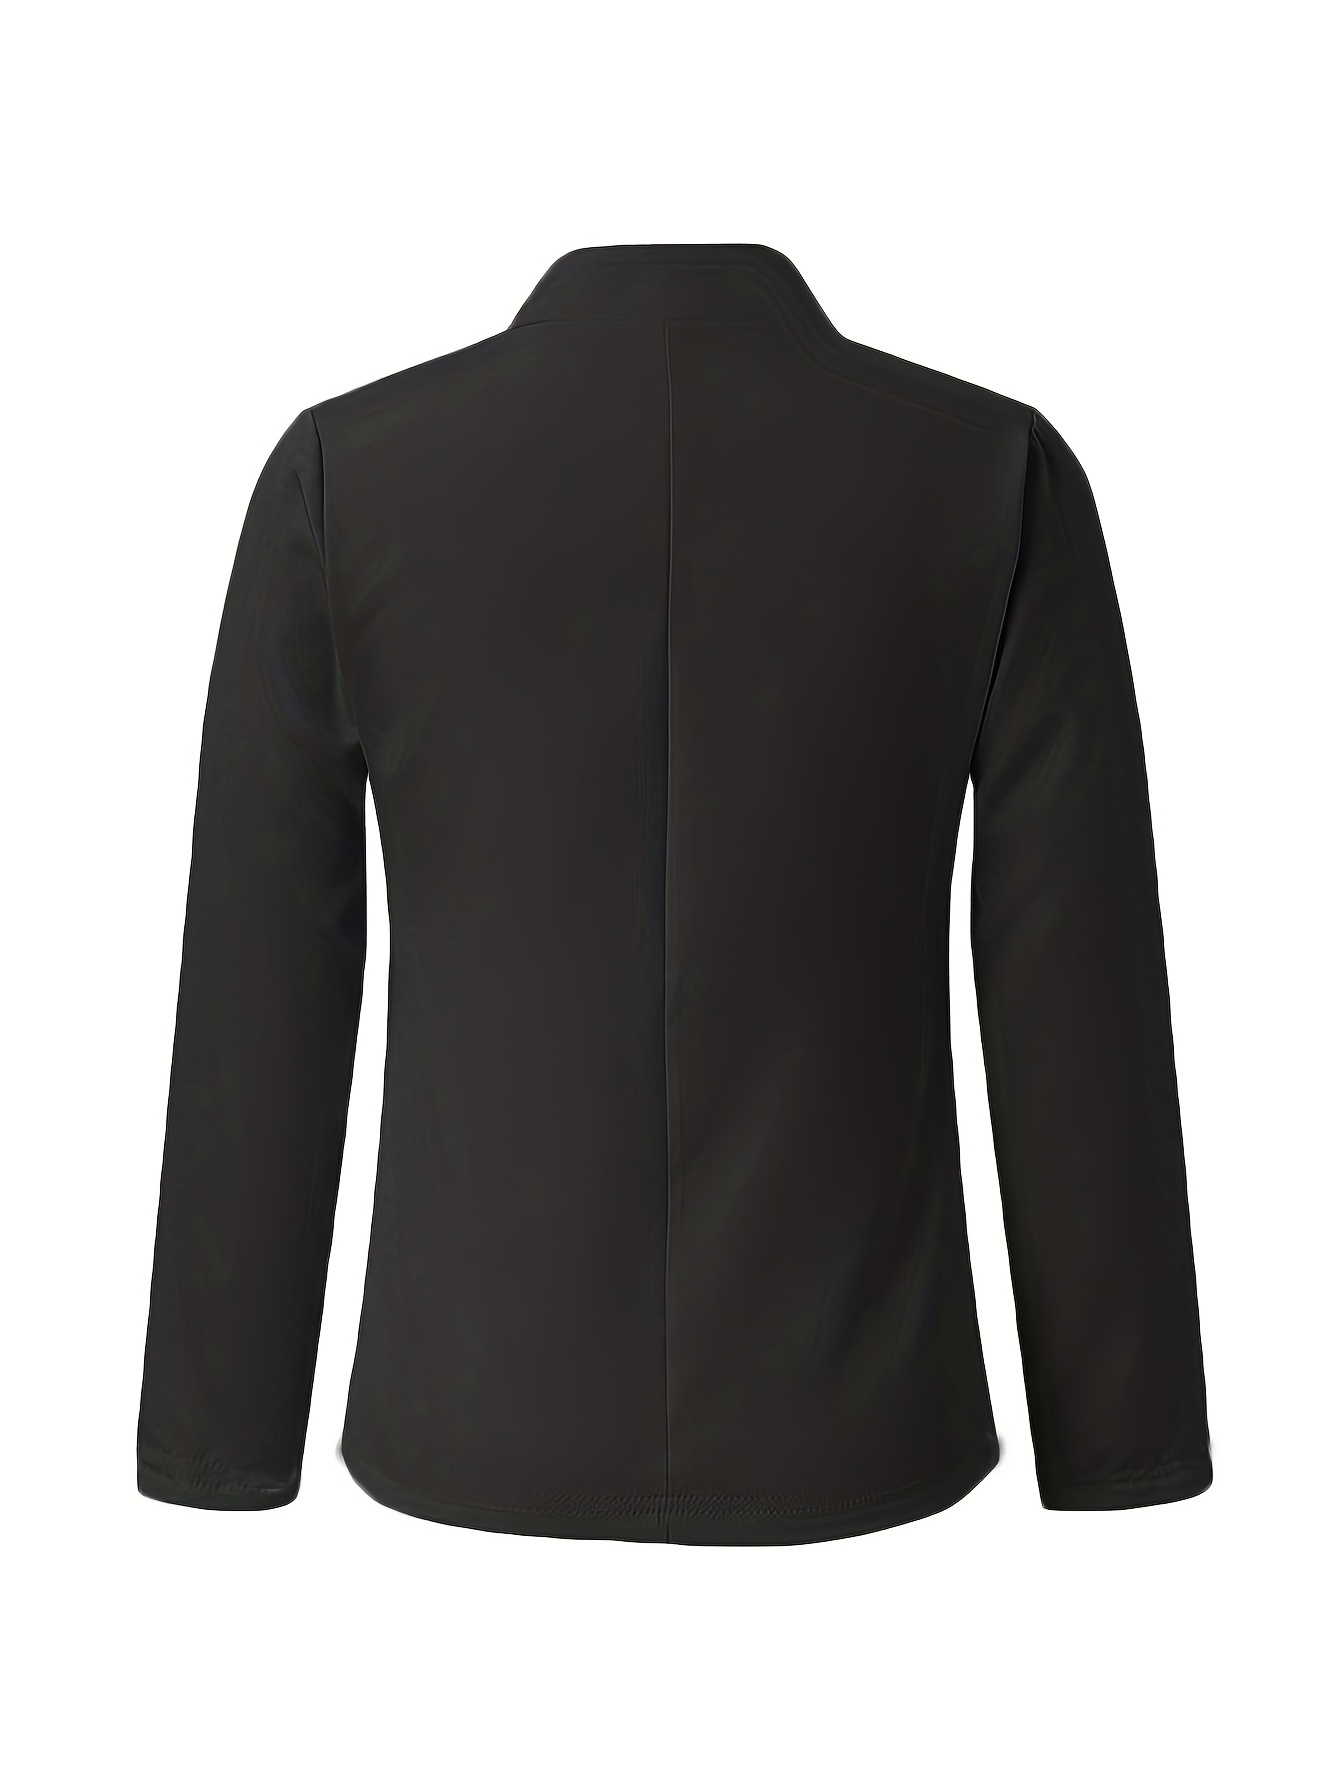 Long Sleeve Open Front Jacket, Solid Outwear For Business, Every Day, Women's Clothing